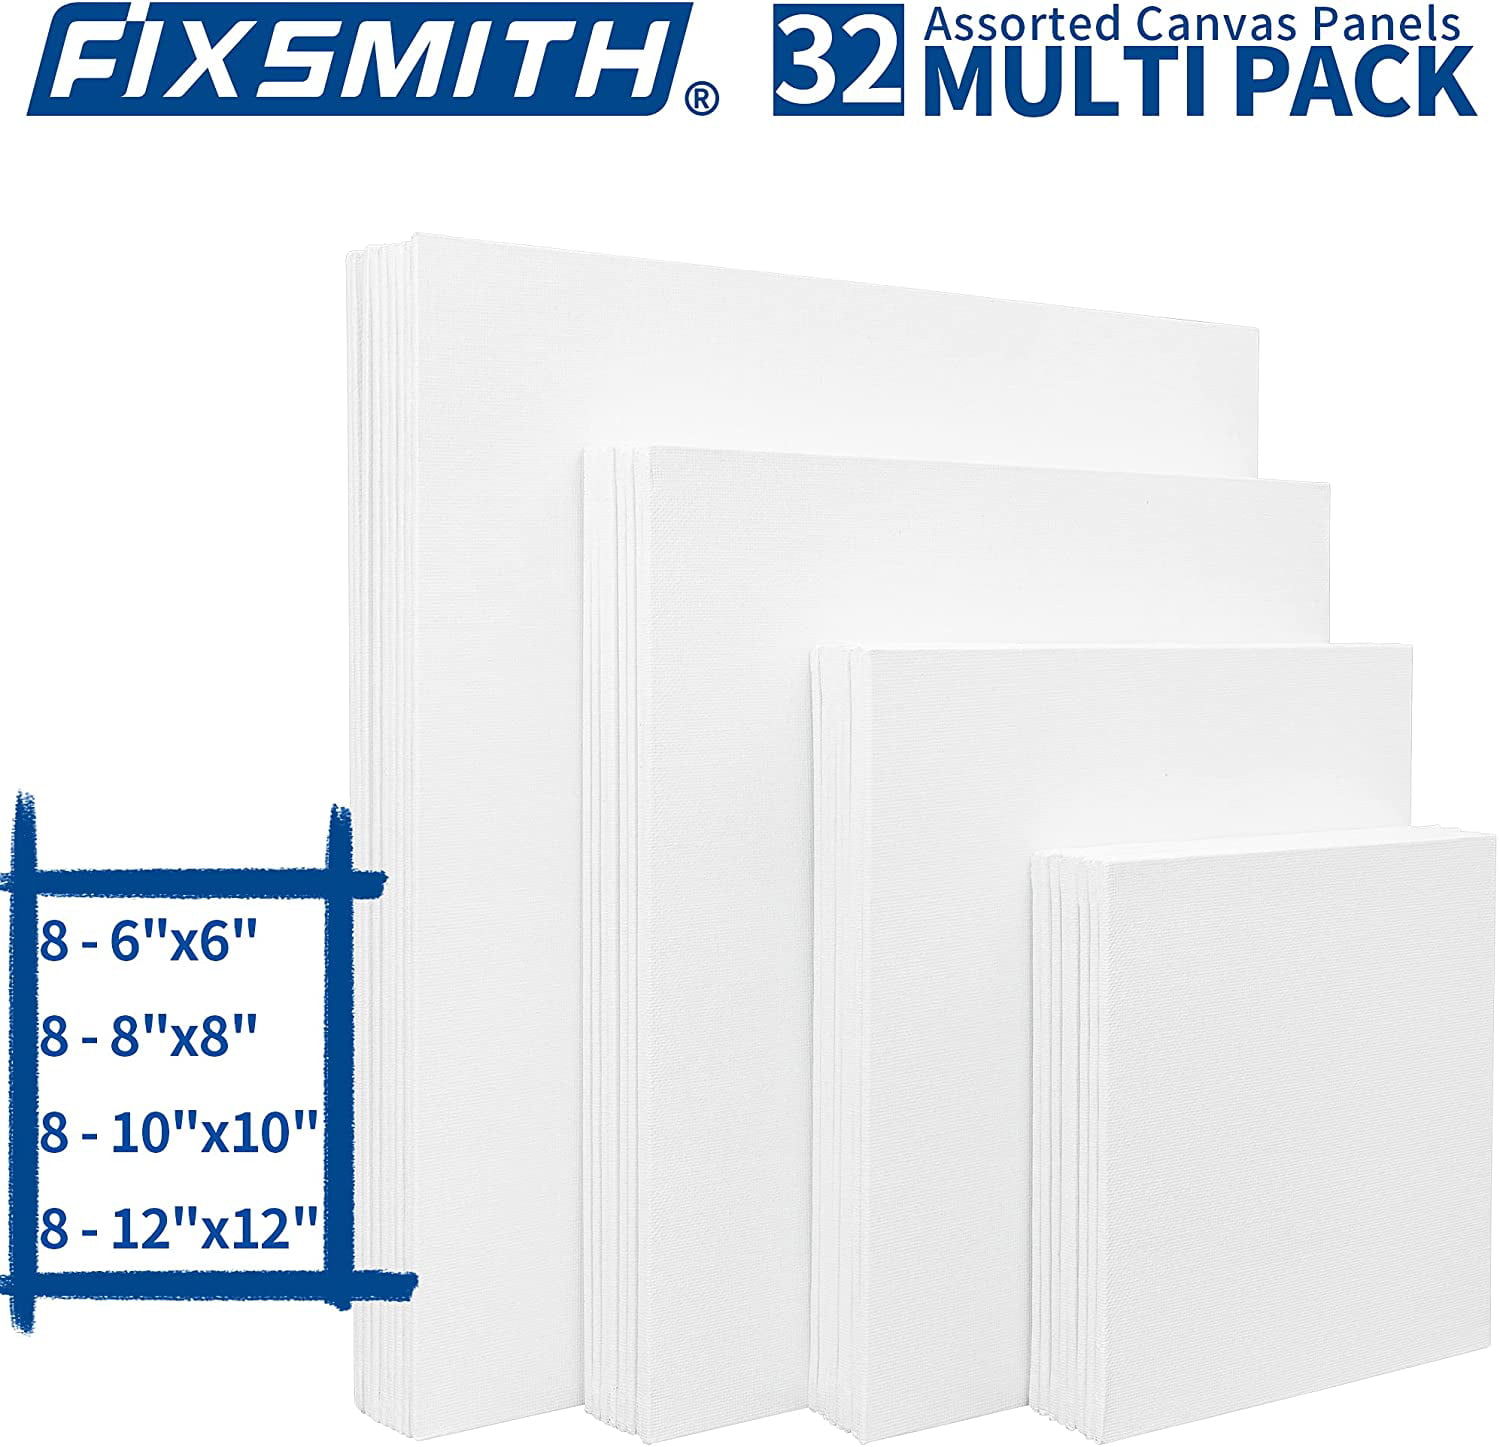 FIXSMITH Canvases for Painting, 9x12 inch Canvas Boards, Super Value 24 Pack White Blank Canvas Panels, 100% Cotton Primed,Painting Art Supplies for